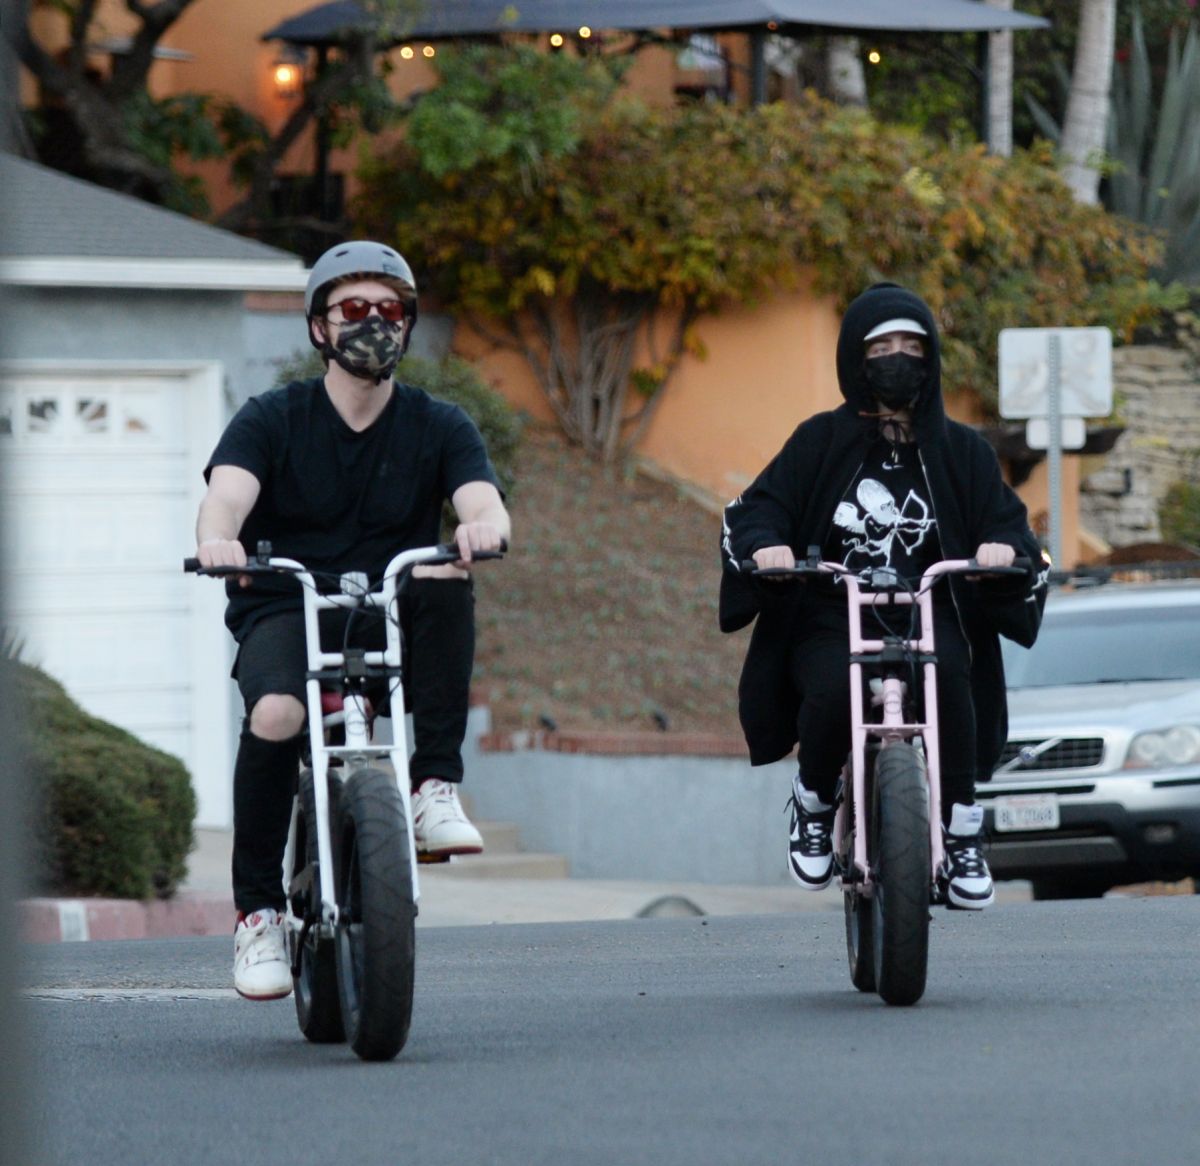 billie-eilish-and-finneas-o-connell-out-riding-bikes-in-los-angeles-12-21-2020-0.jpg